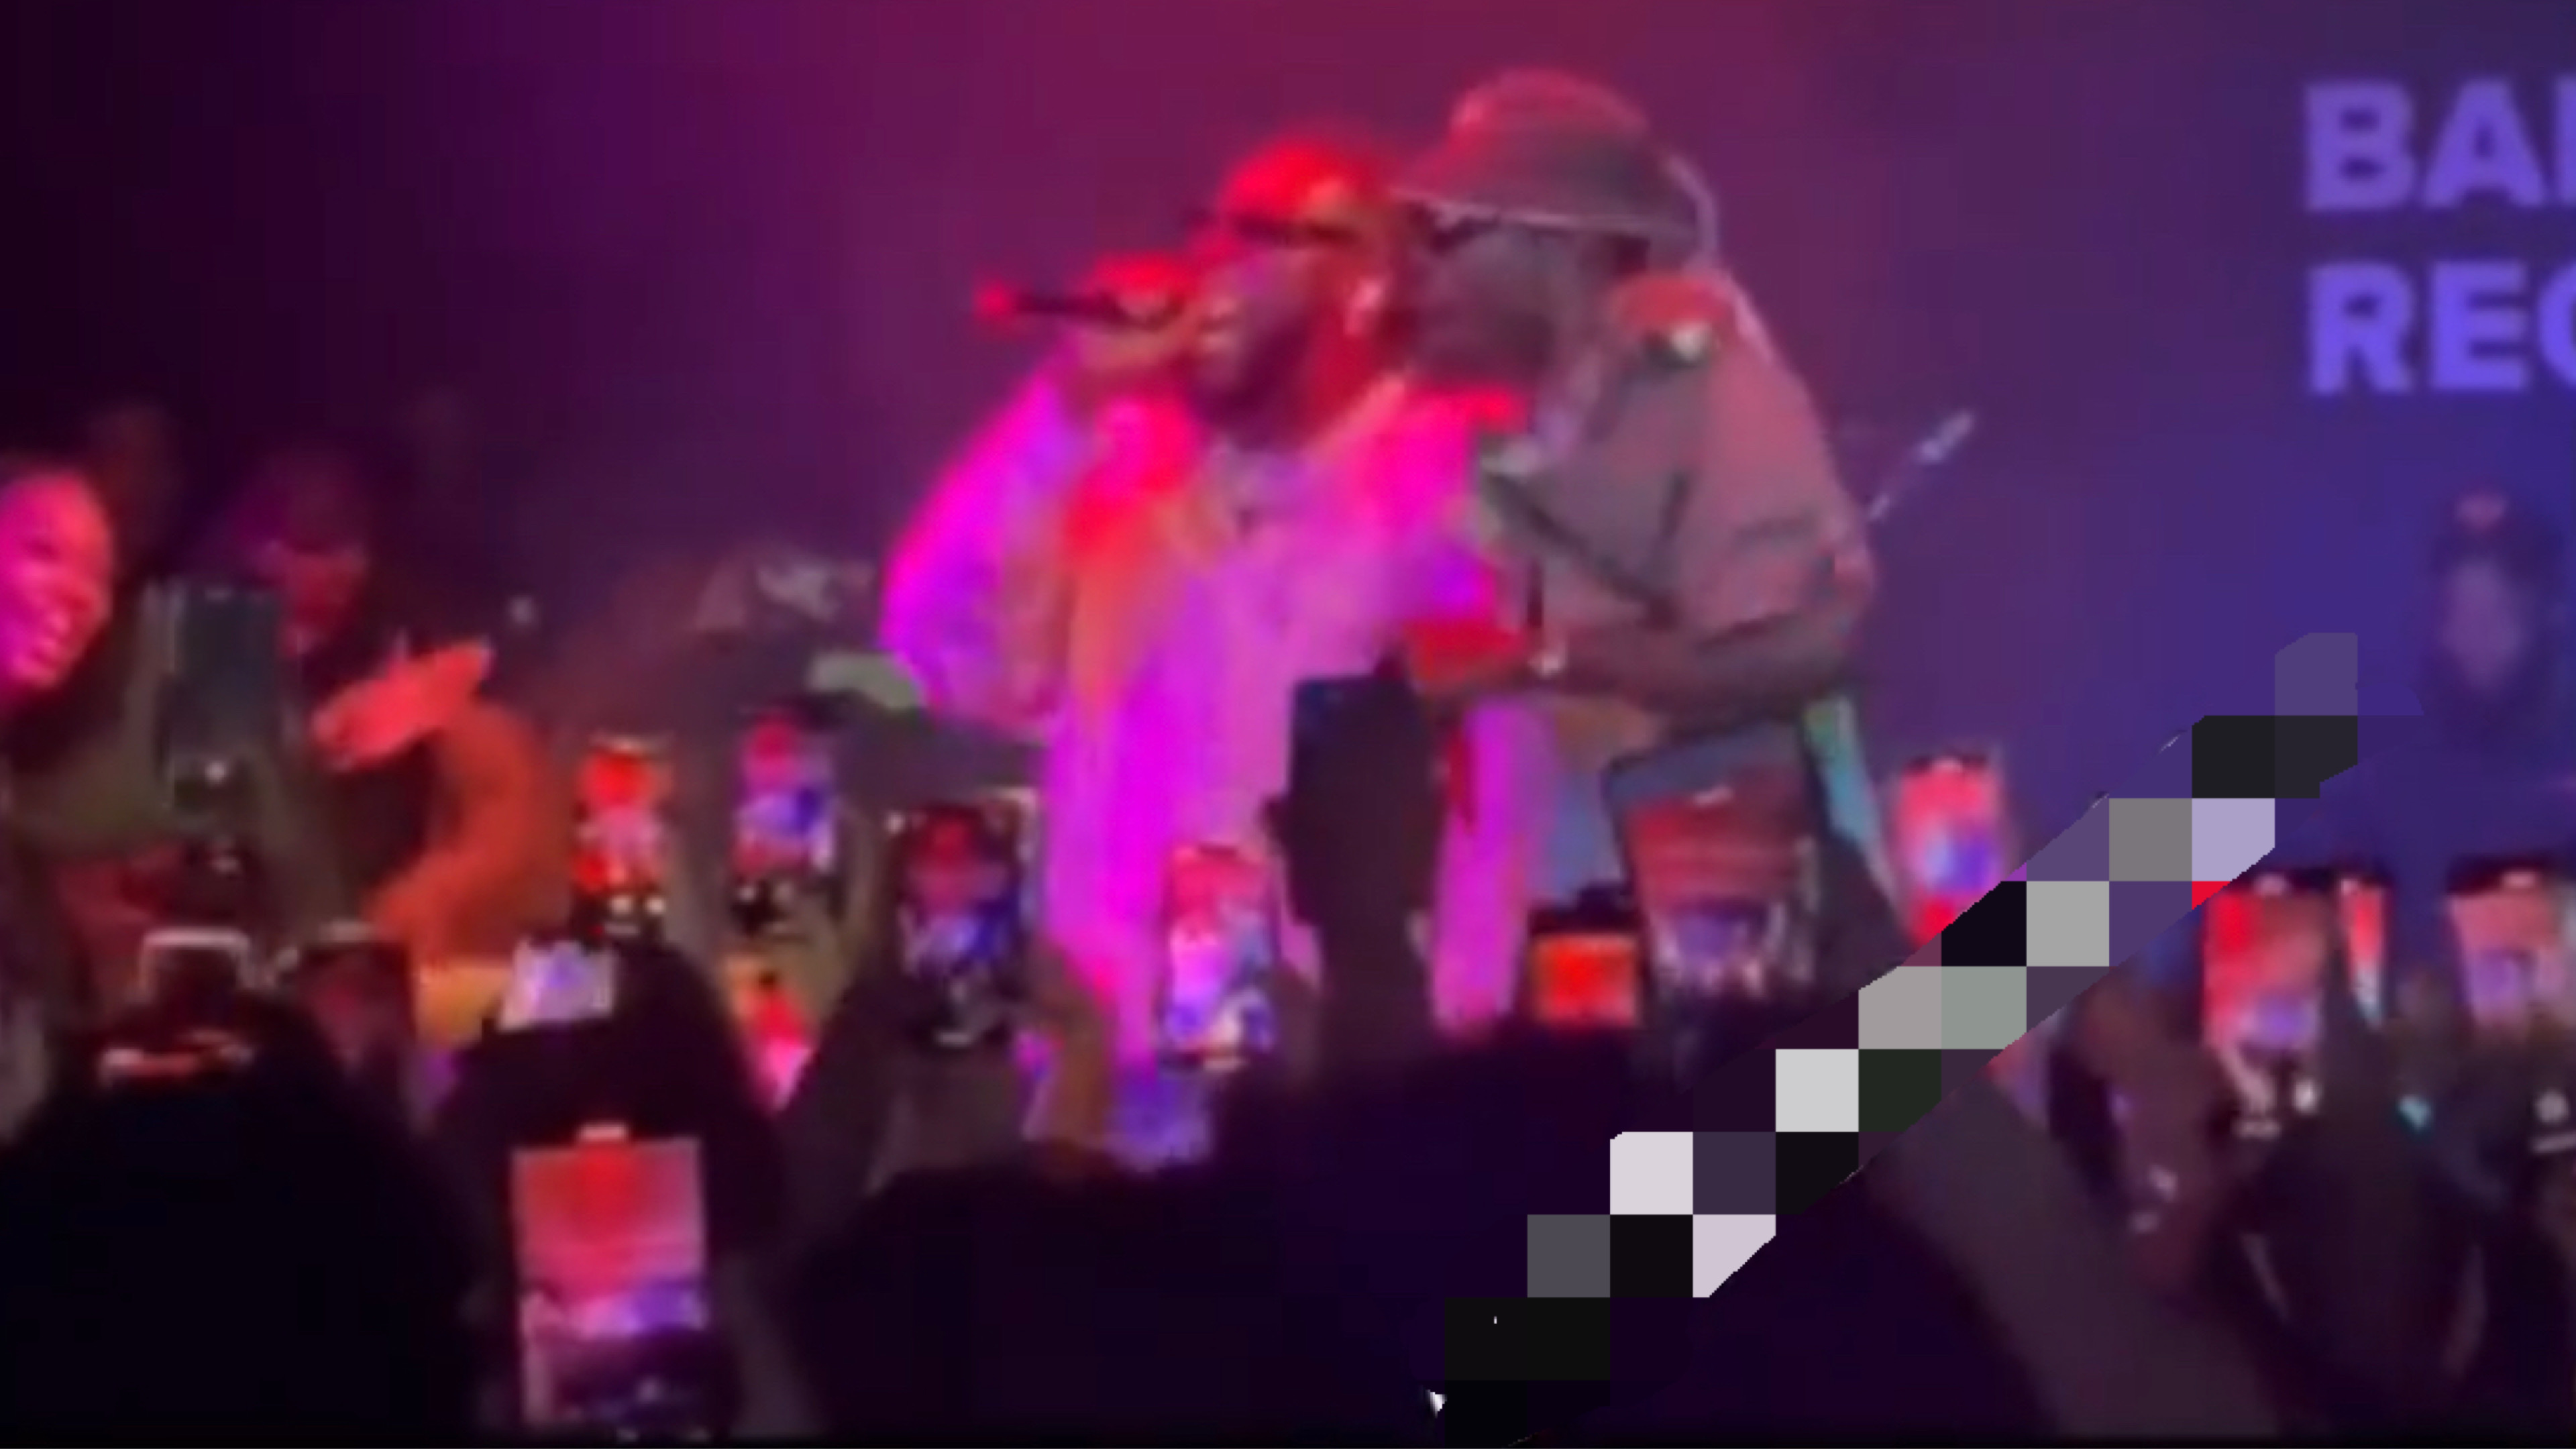 Burna Boy and Black Sherif perform together for the first time in UK [WATCH]